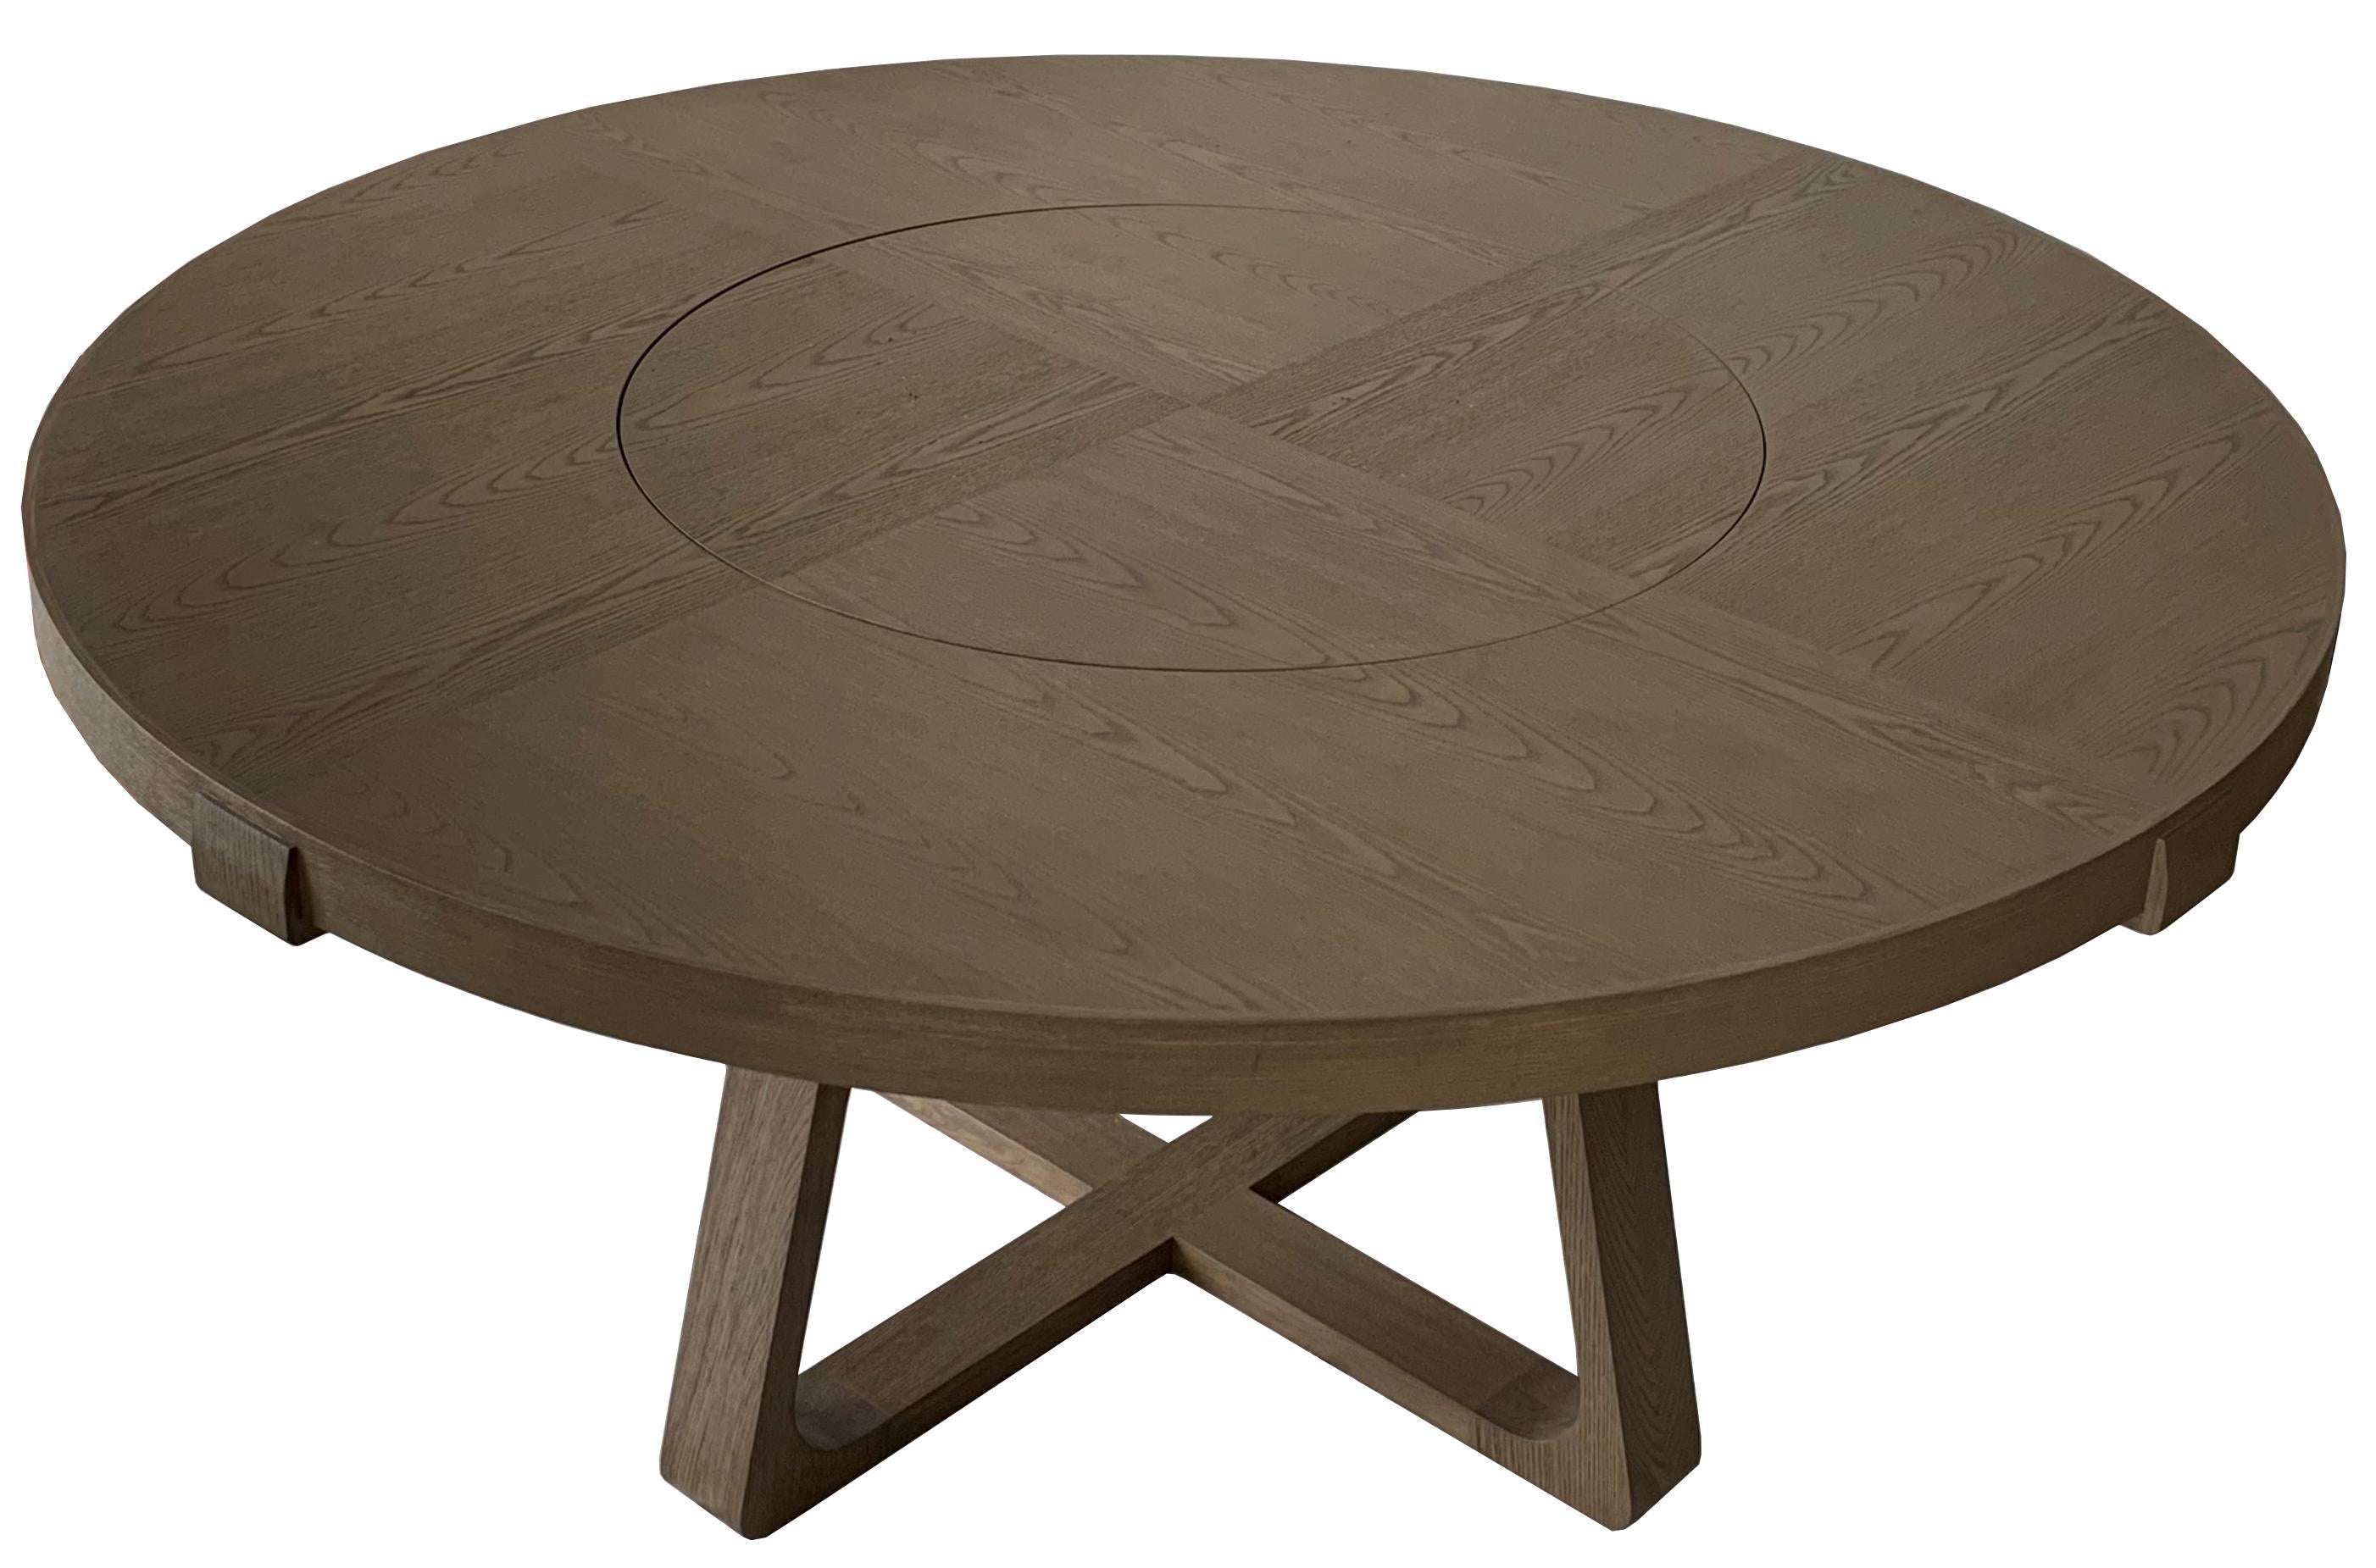 Round wooden dining table 200cm with Lazy Susan in the middle.
Removable Lazy Susan for cleaning purpose.
Available other sizes upon request.
Available without Lazy Susan.

Round dining table with Lazy Susan
Color: Grey
Size: 200Ø x 73 H